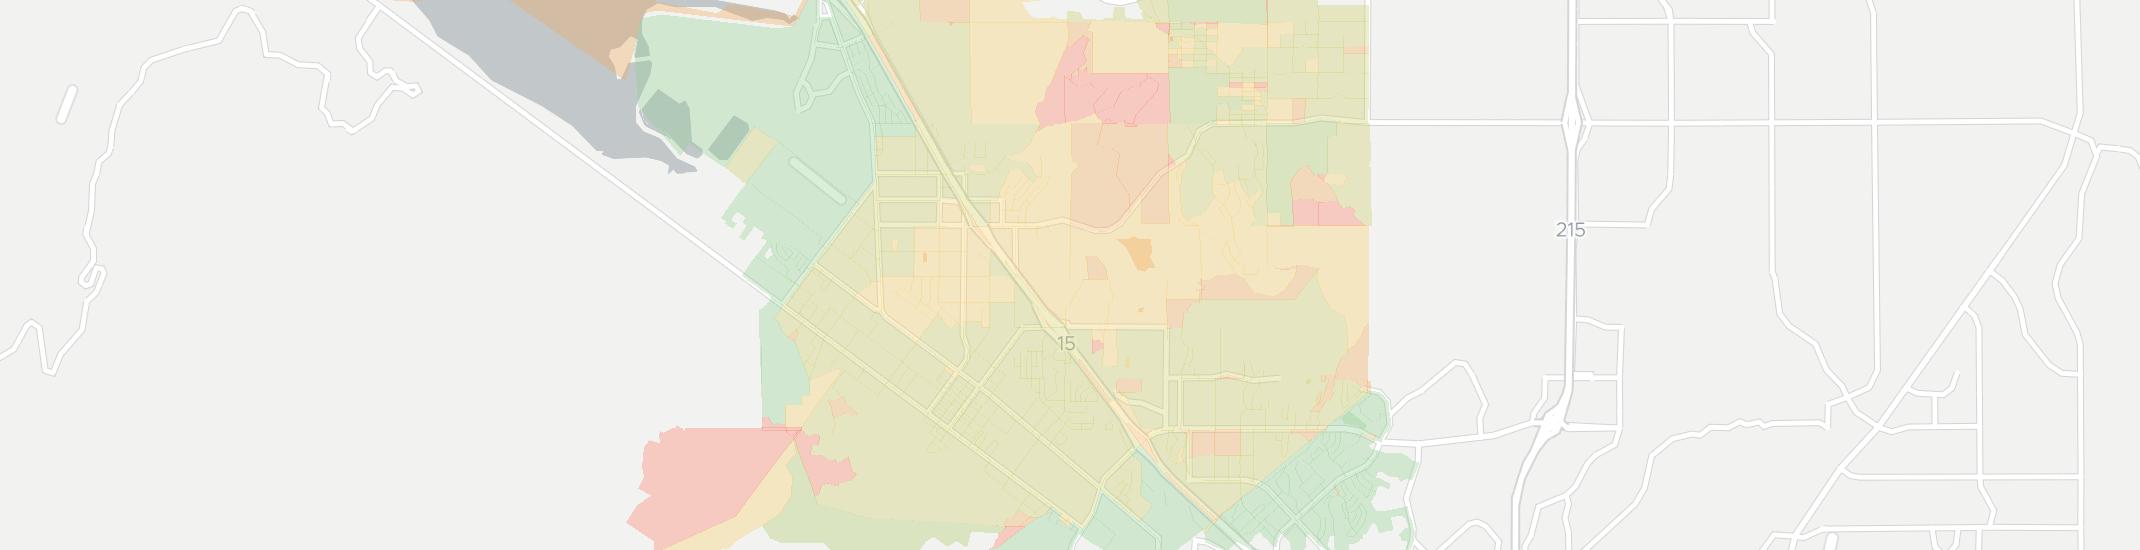 Wildomar Internet Competition Map. Click for interactive map